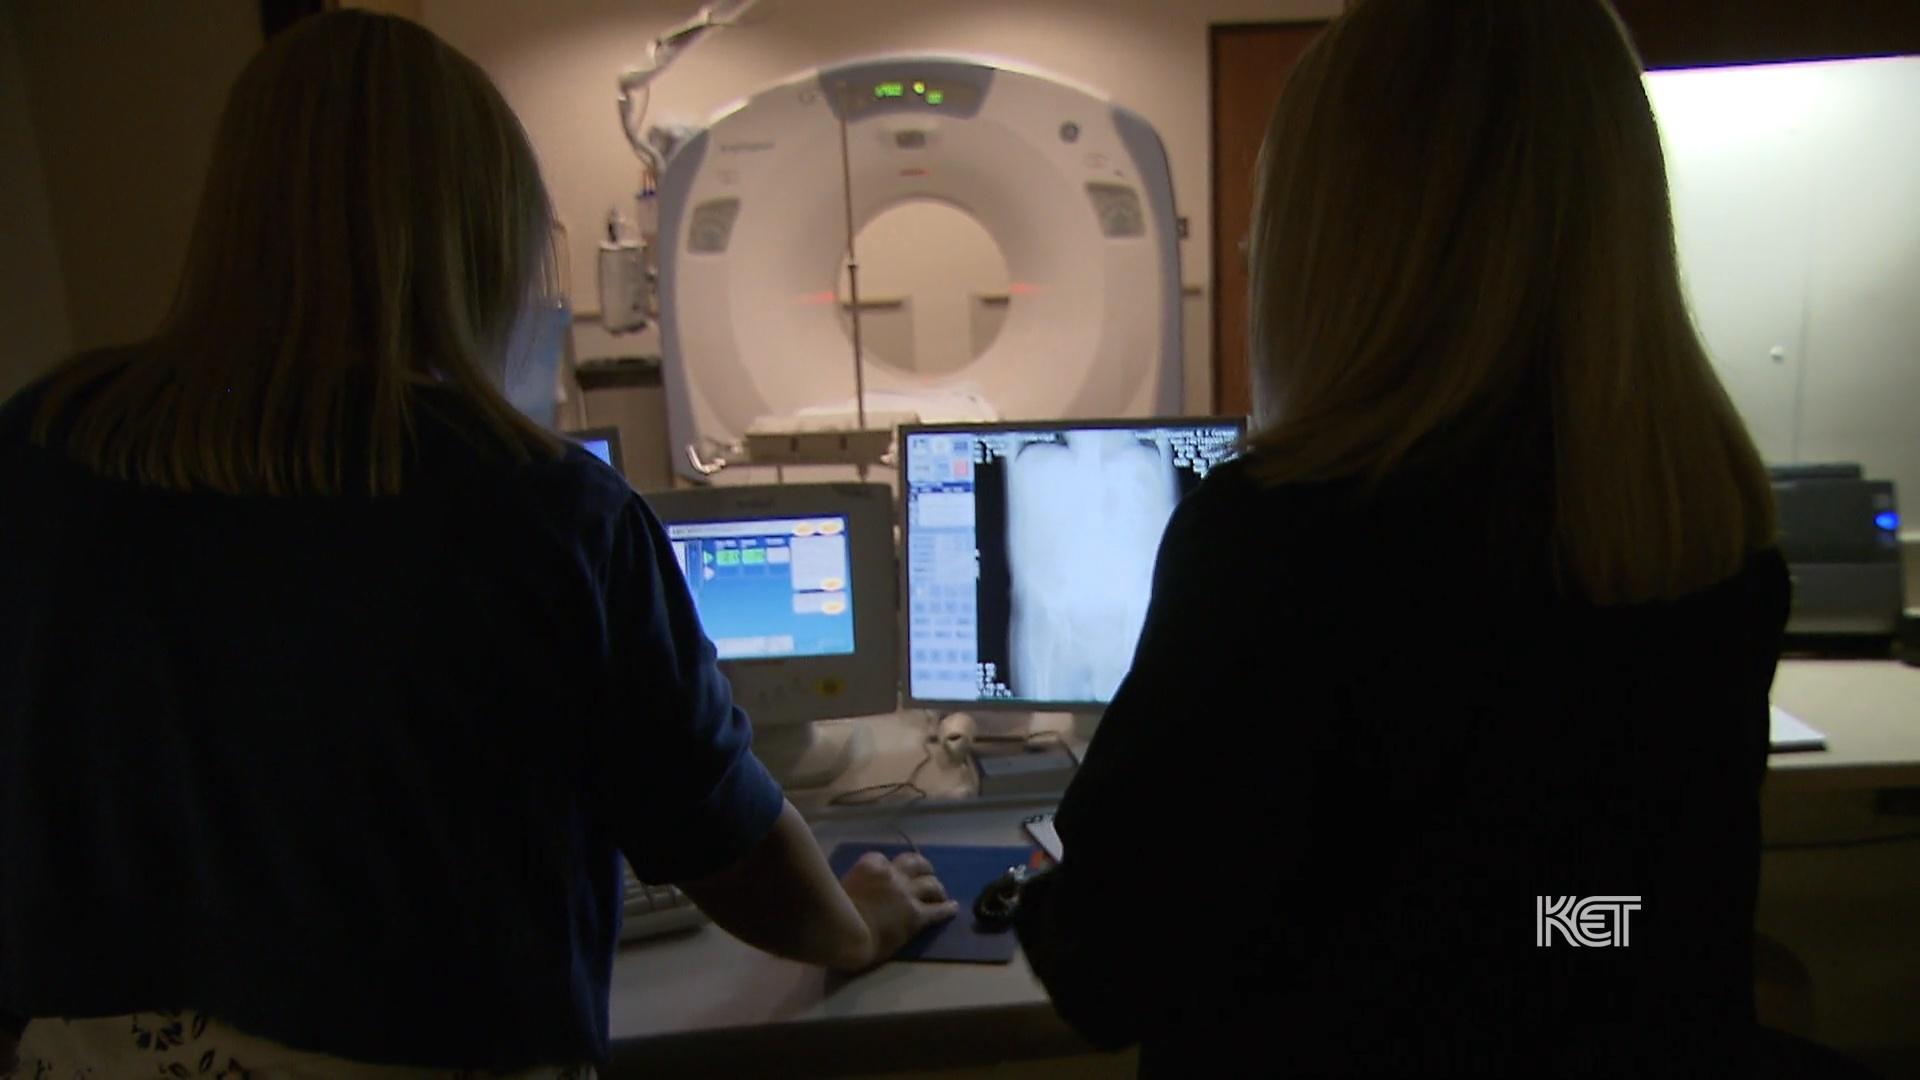 Two women standing in front of computers and an MRI machine